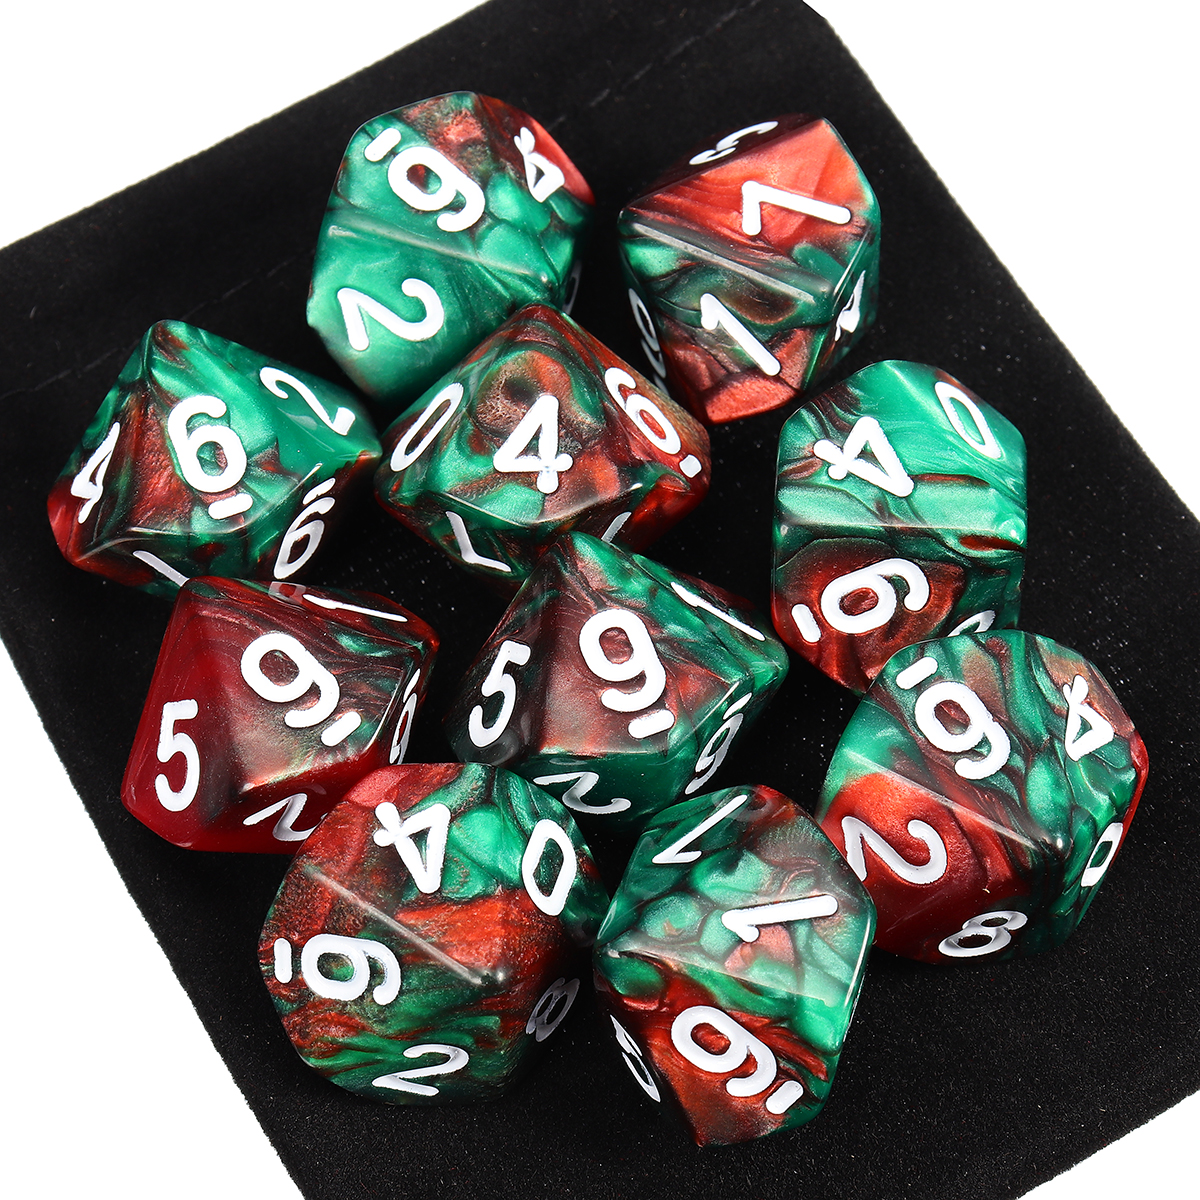 10pcs-10-Sided-Dice-D10-Polyhedral-Dice-RPG-Role-Playing-Game-Dices-w-bag-1351752-8